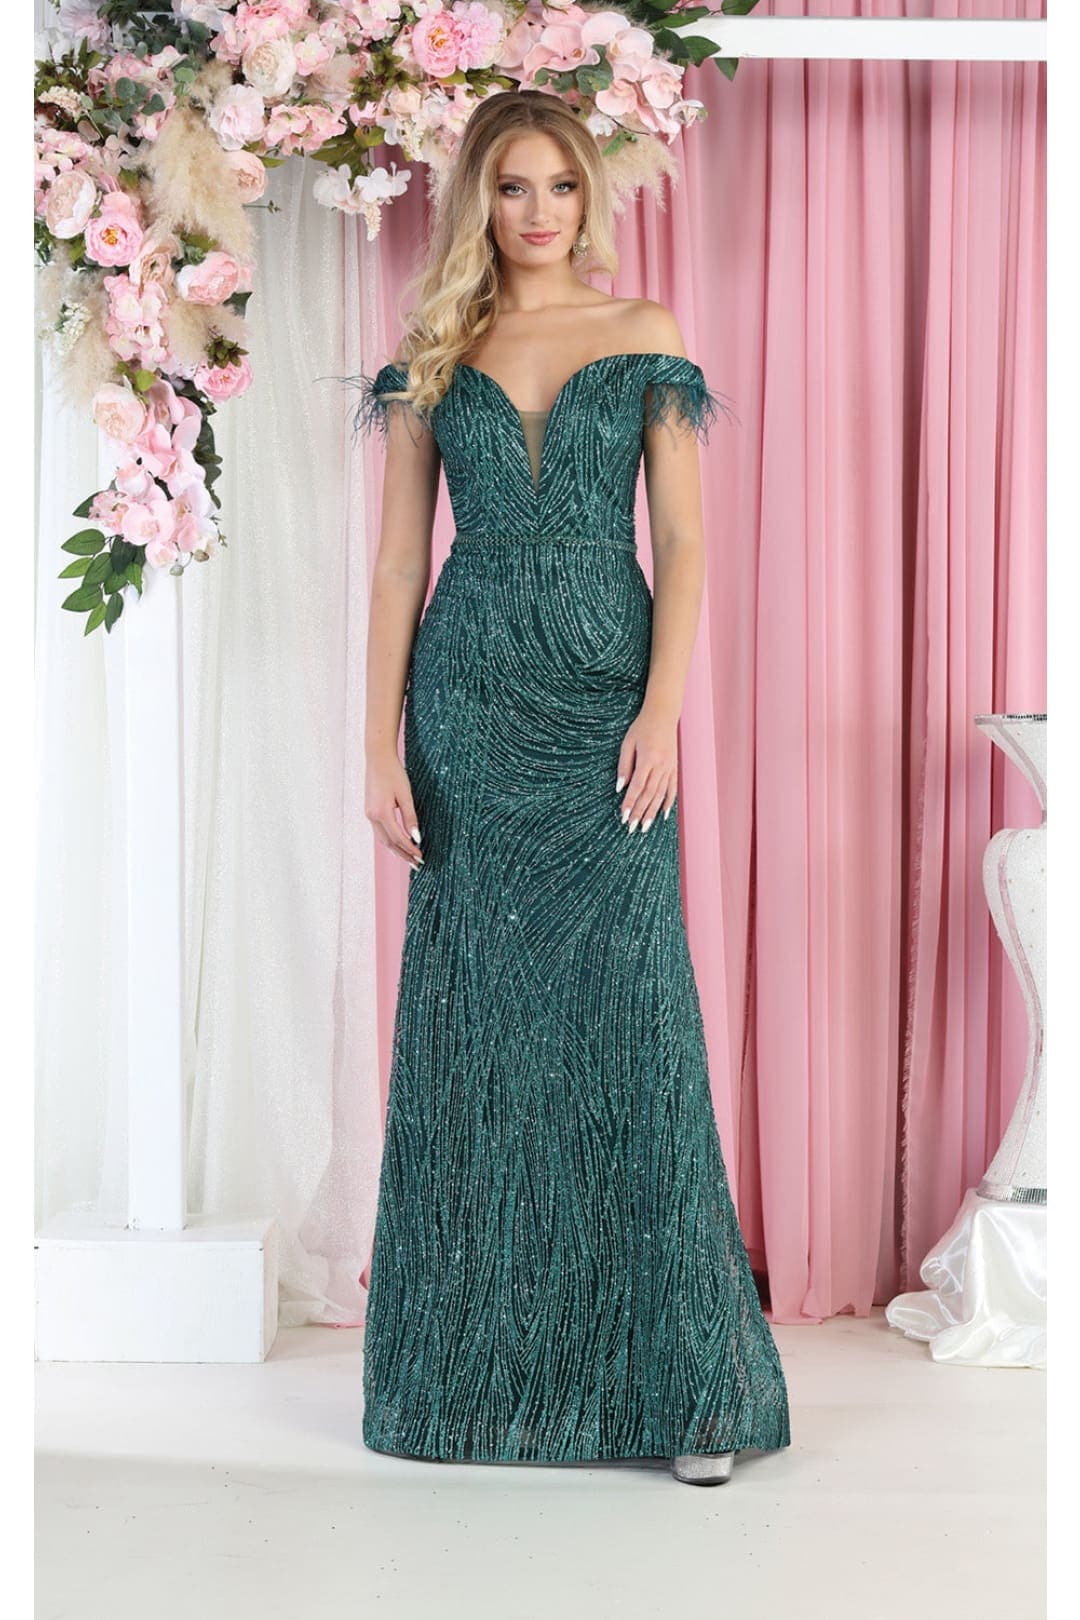 Royal Queen RQ7963 Off The Shoulder Feathers Prom Gown - HUNTER GREEN / 4 - Dress